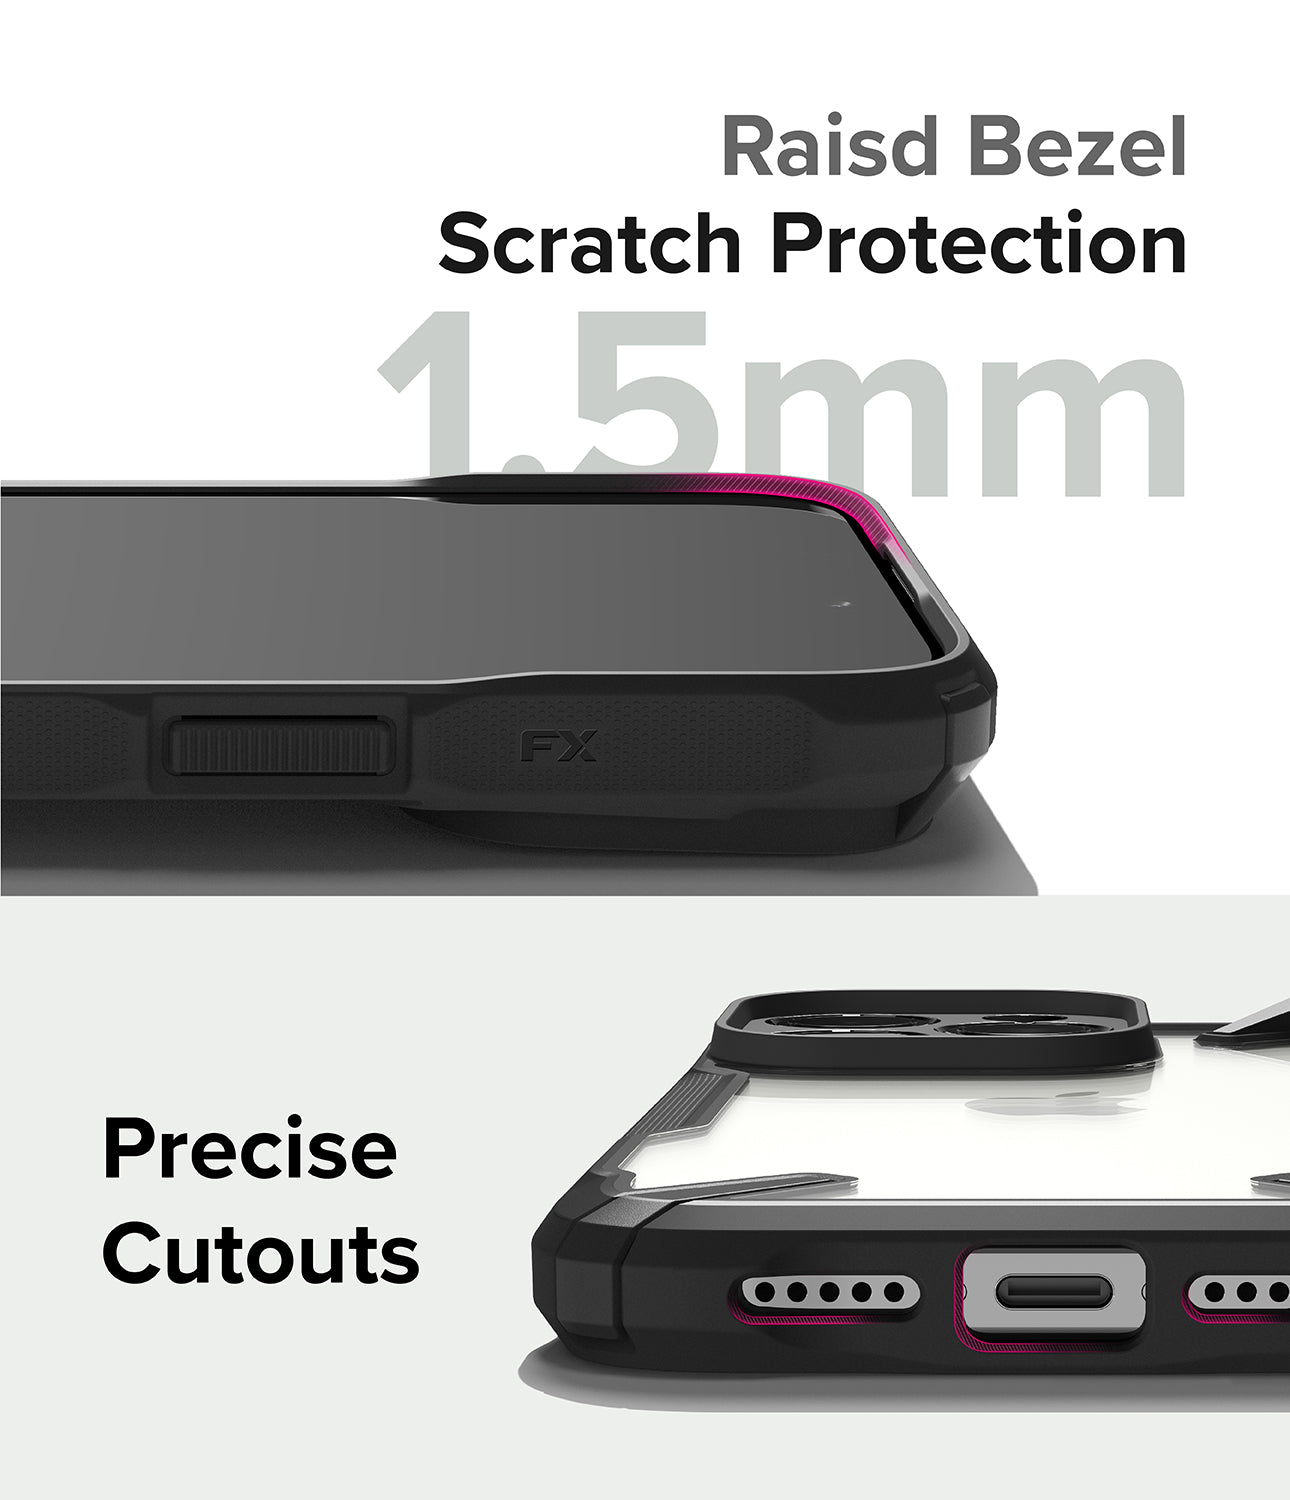 iPhone 15 Pro Case | Fusion-X - Black - Raised Bezel Scratch Protection and Precise Cutouts.